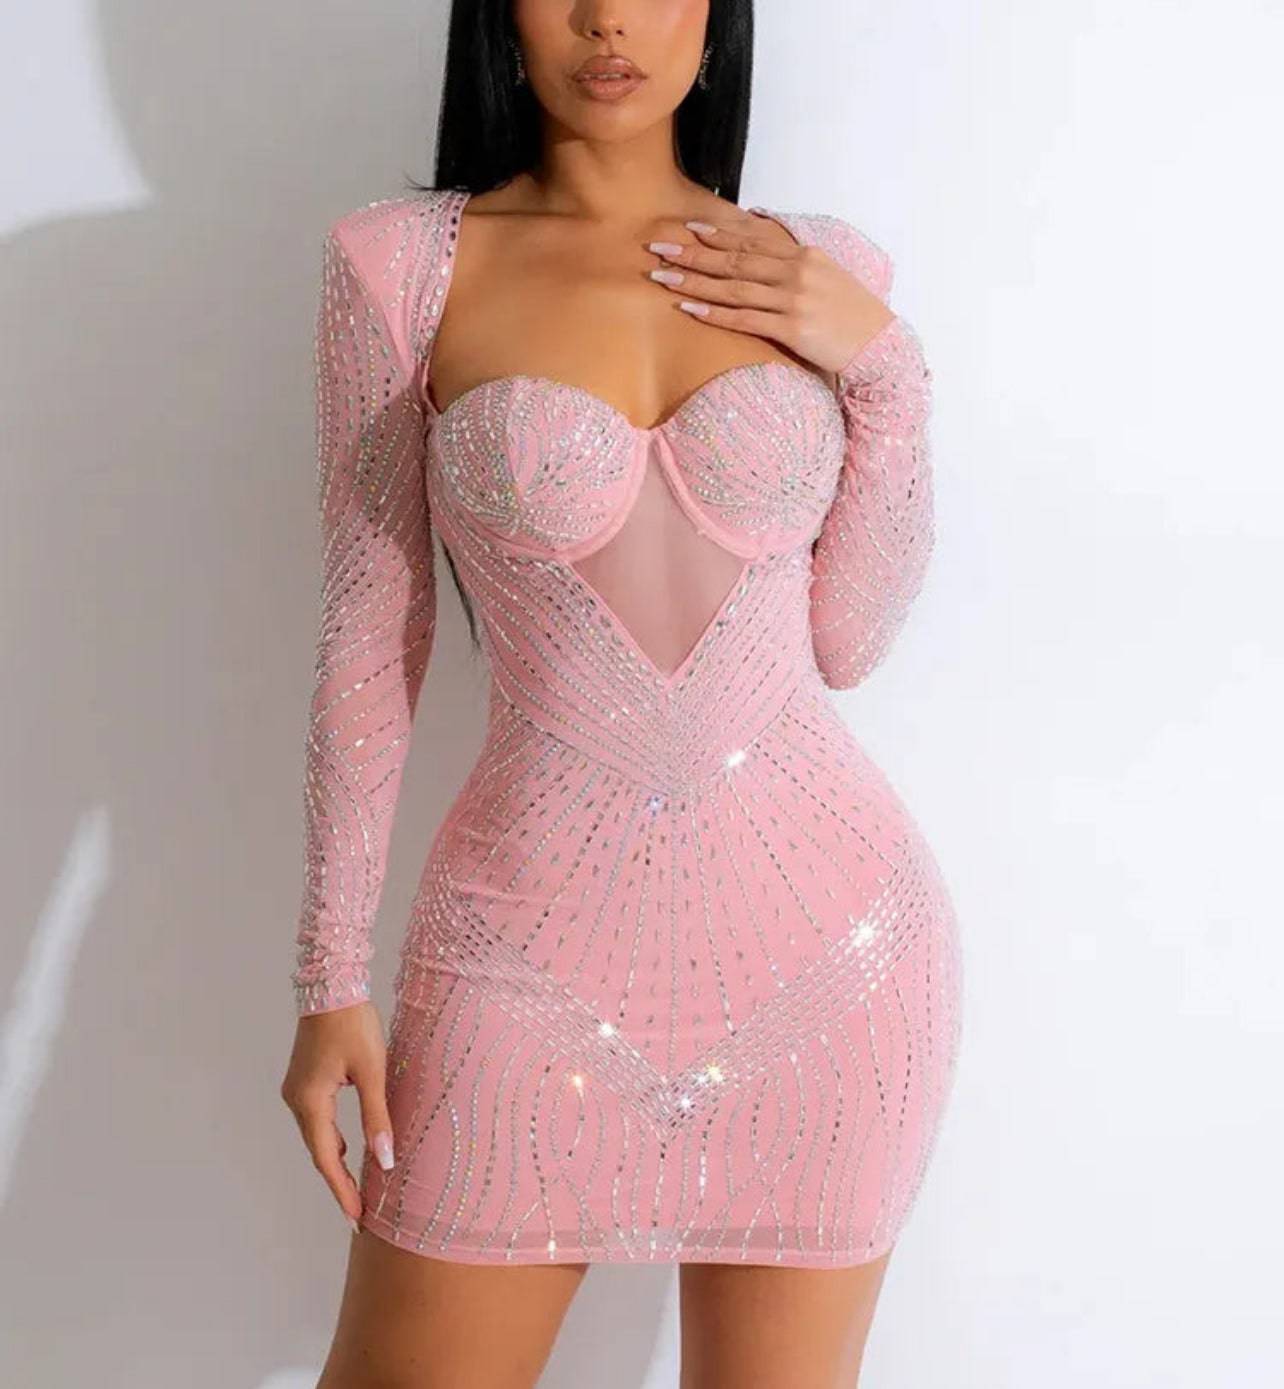 Sparkling Starlight Party Dress - Veronica Luxe-bandage dress